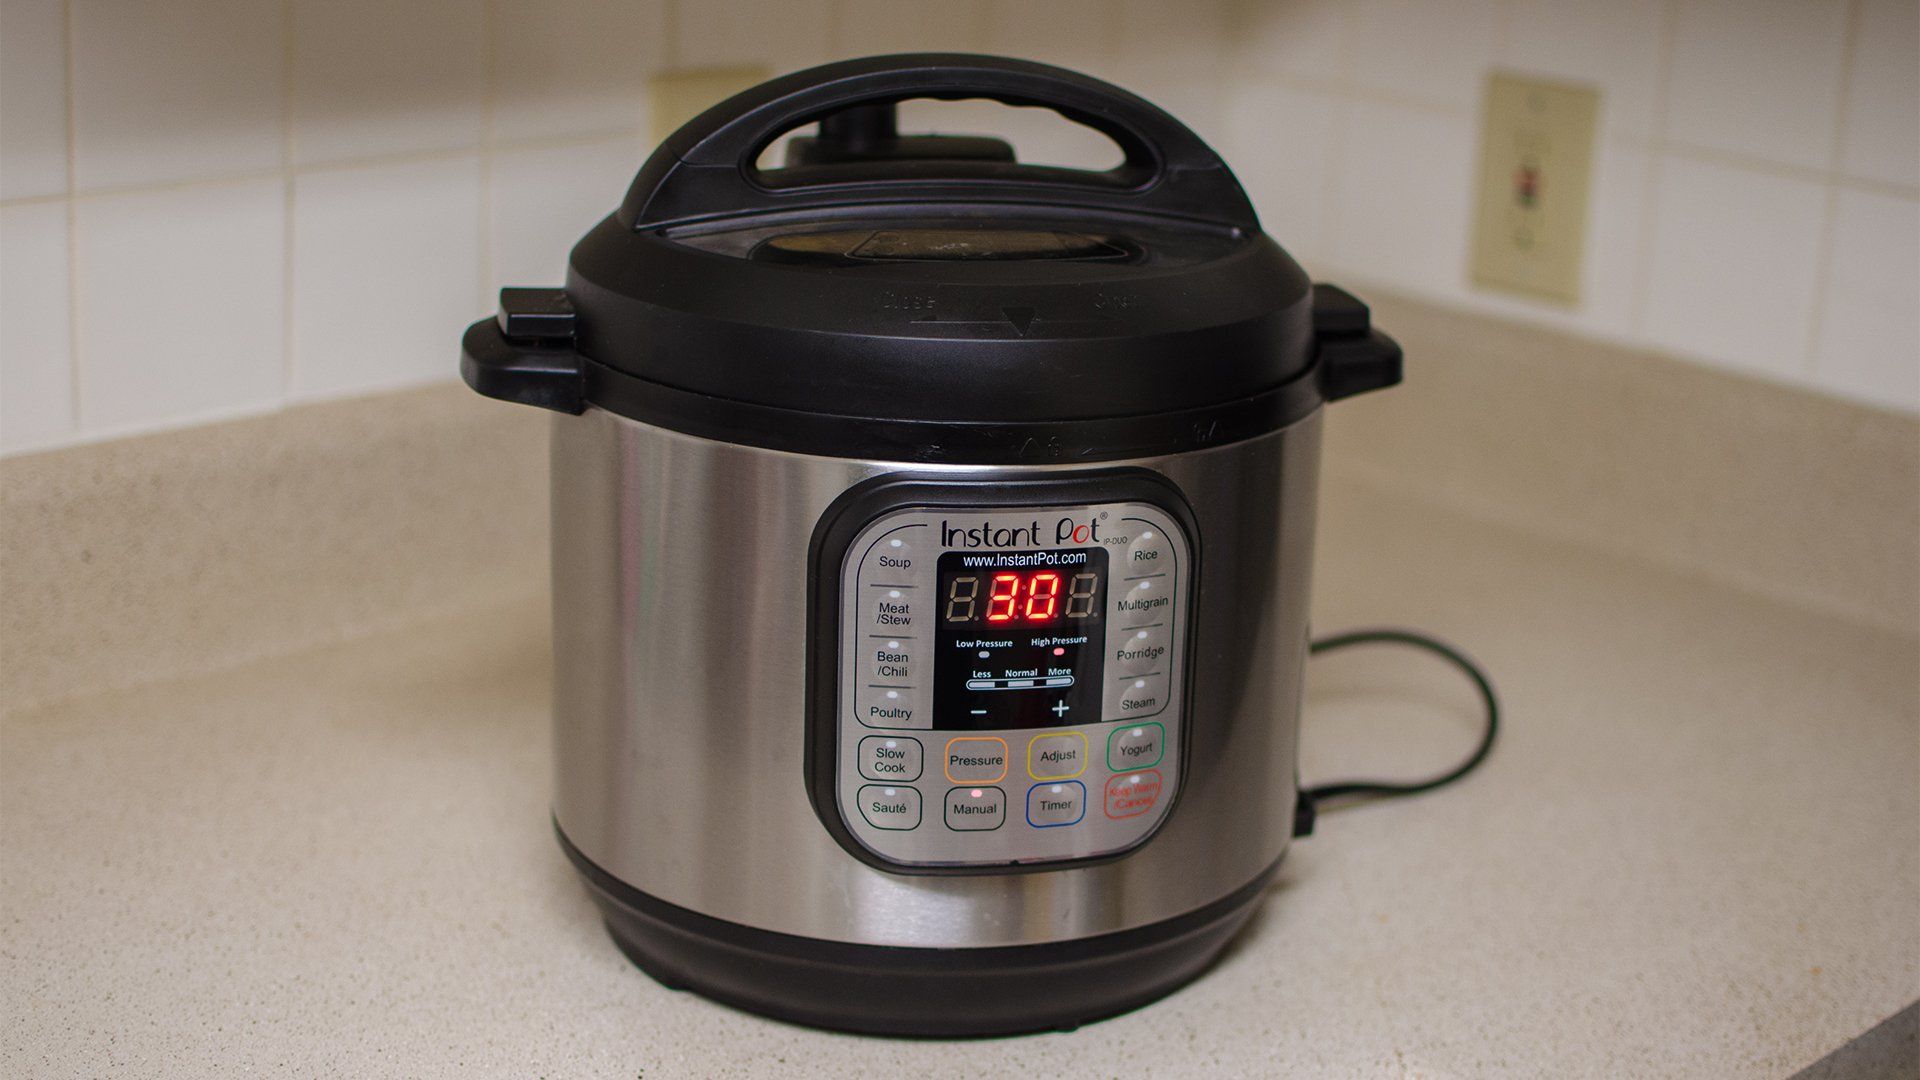 Instant Pot Review: The Must-Have Kitchen Appliance